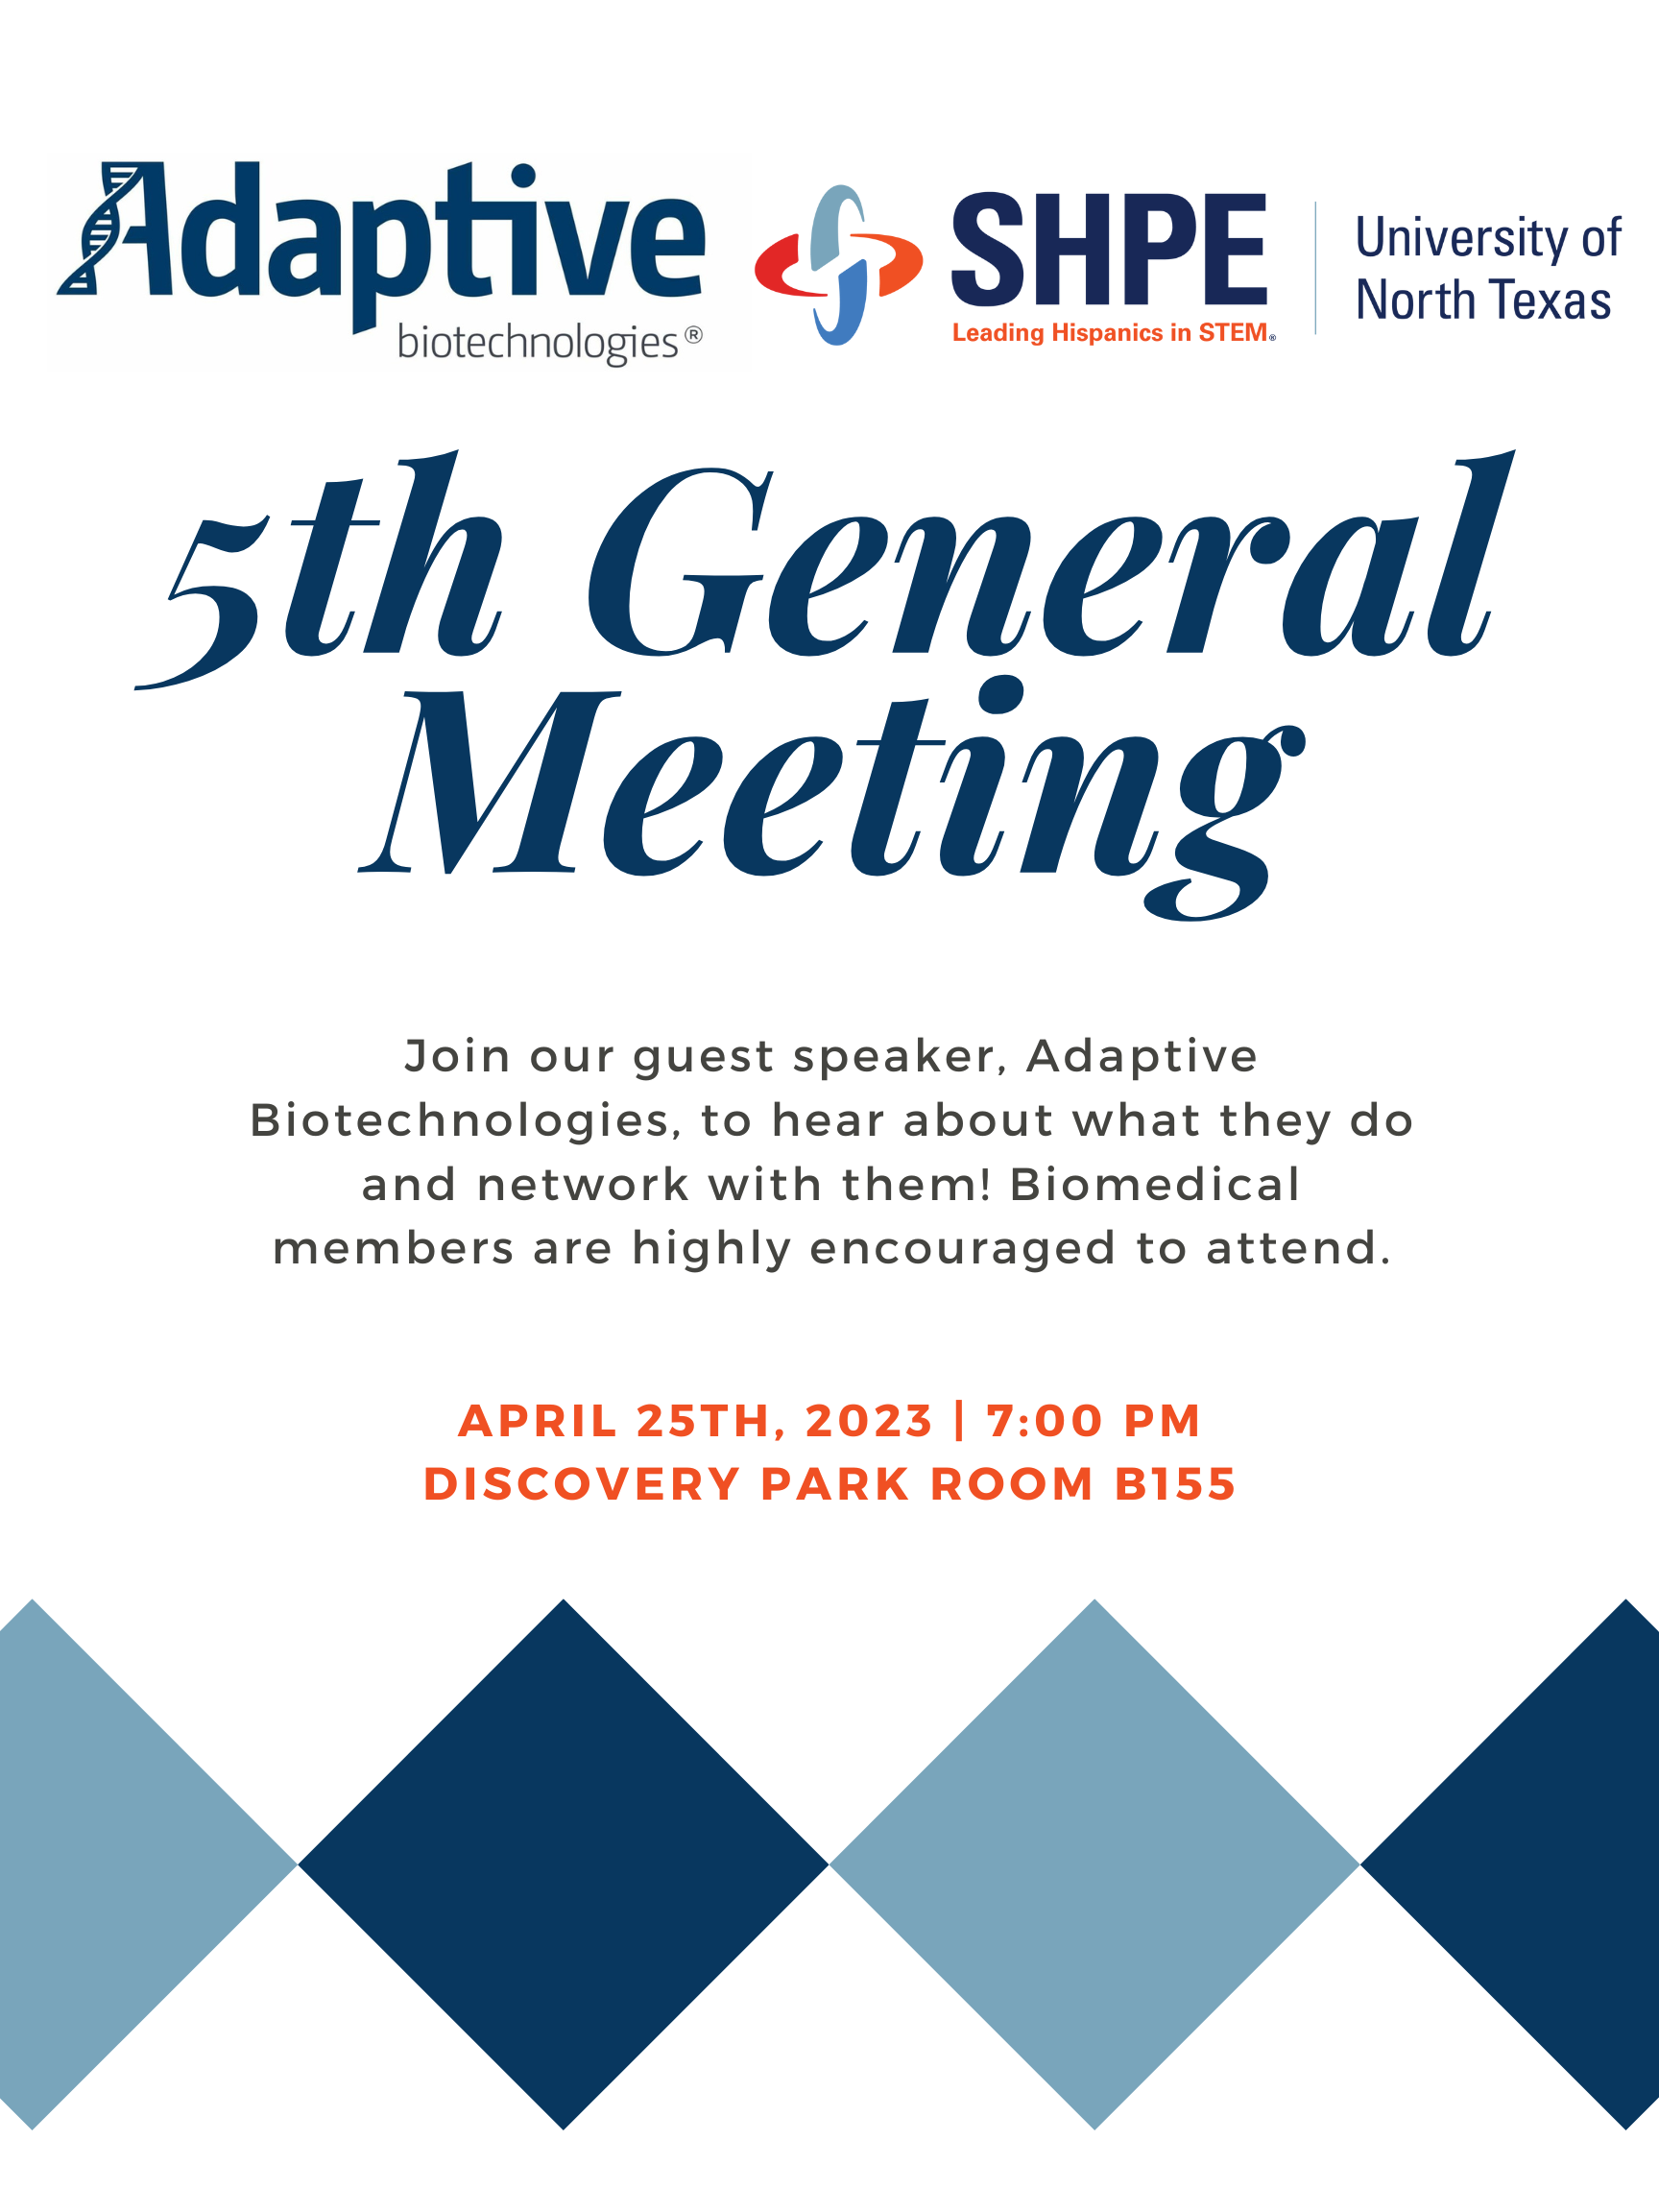 5th_General_Meeting_with_Adaptive_Biotechnologies.png